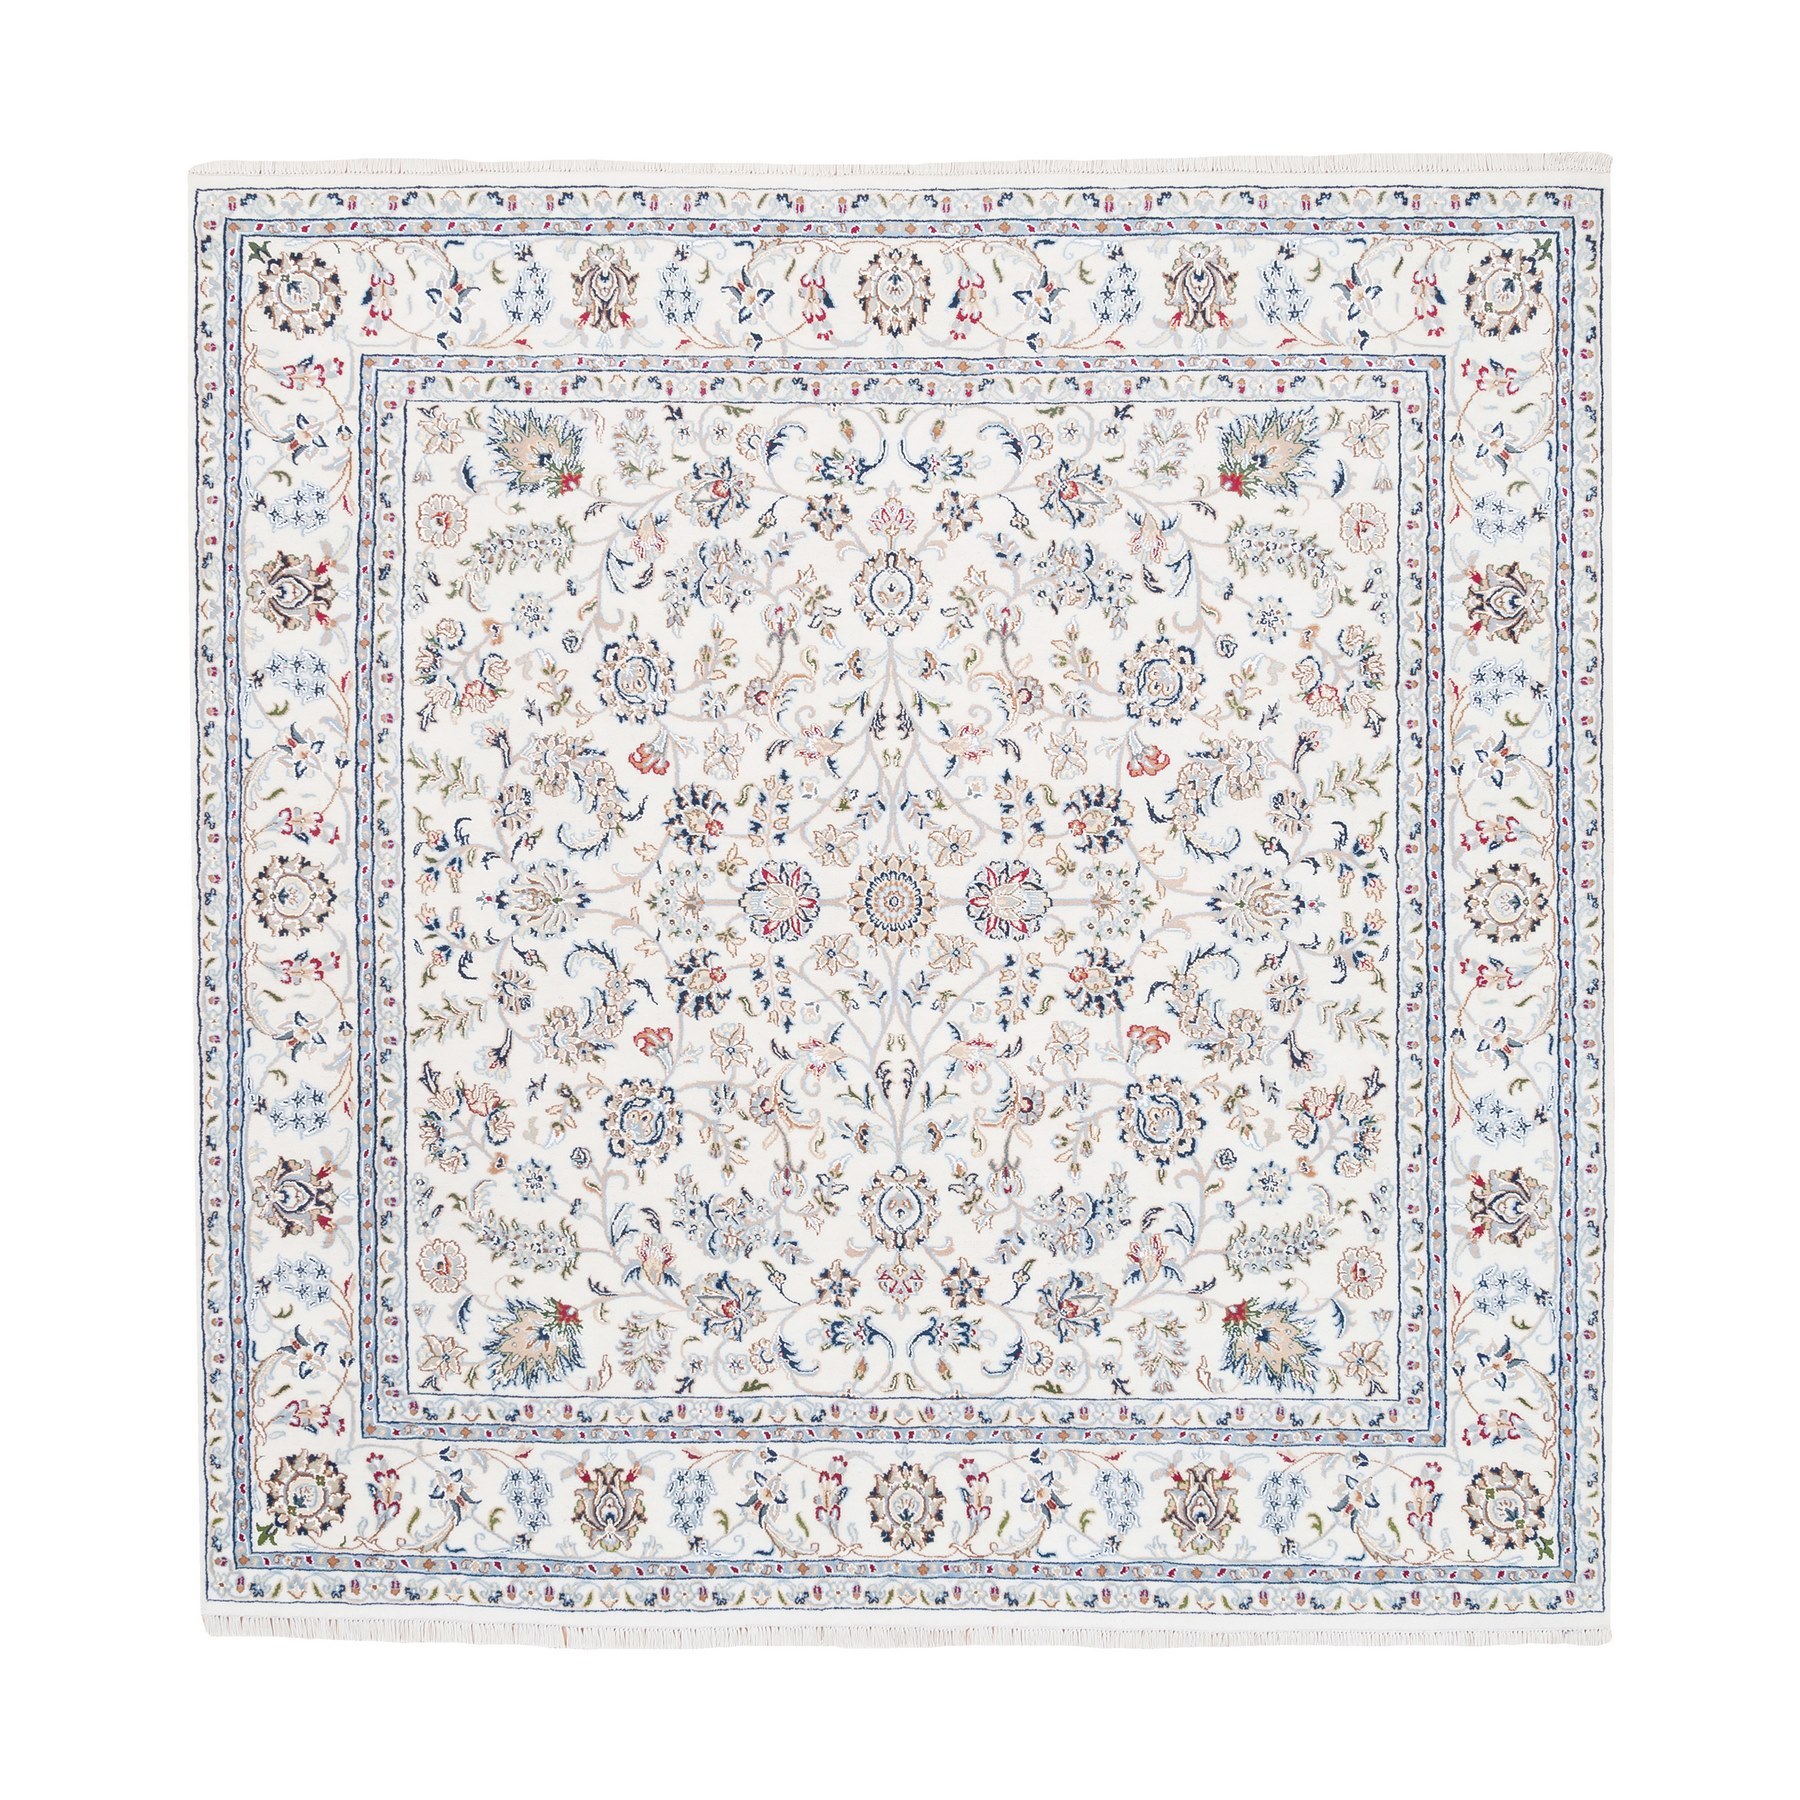 Pirniakan Collection Hand Knotted Ivory Rug No: 1125616